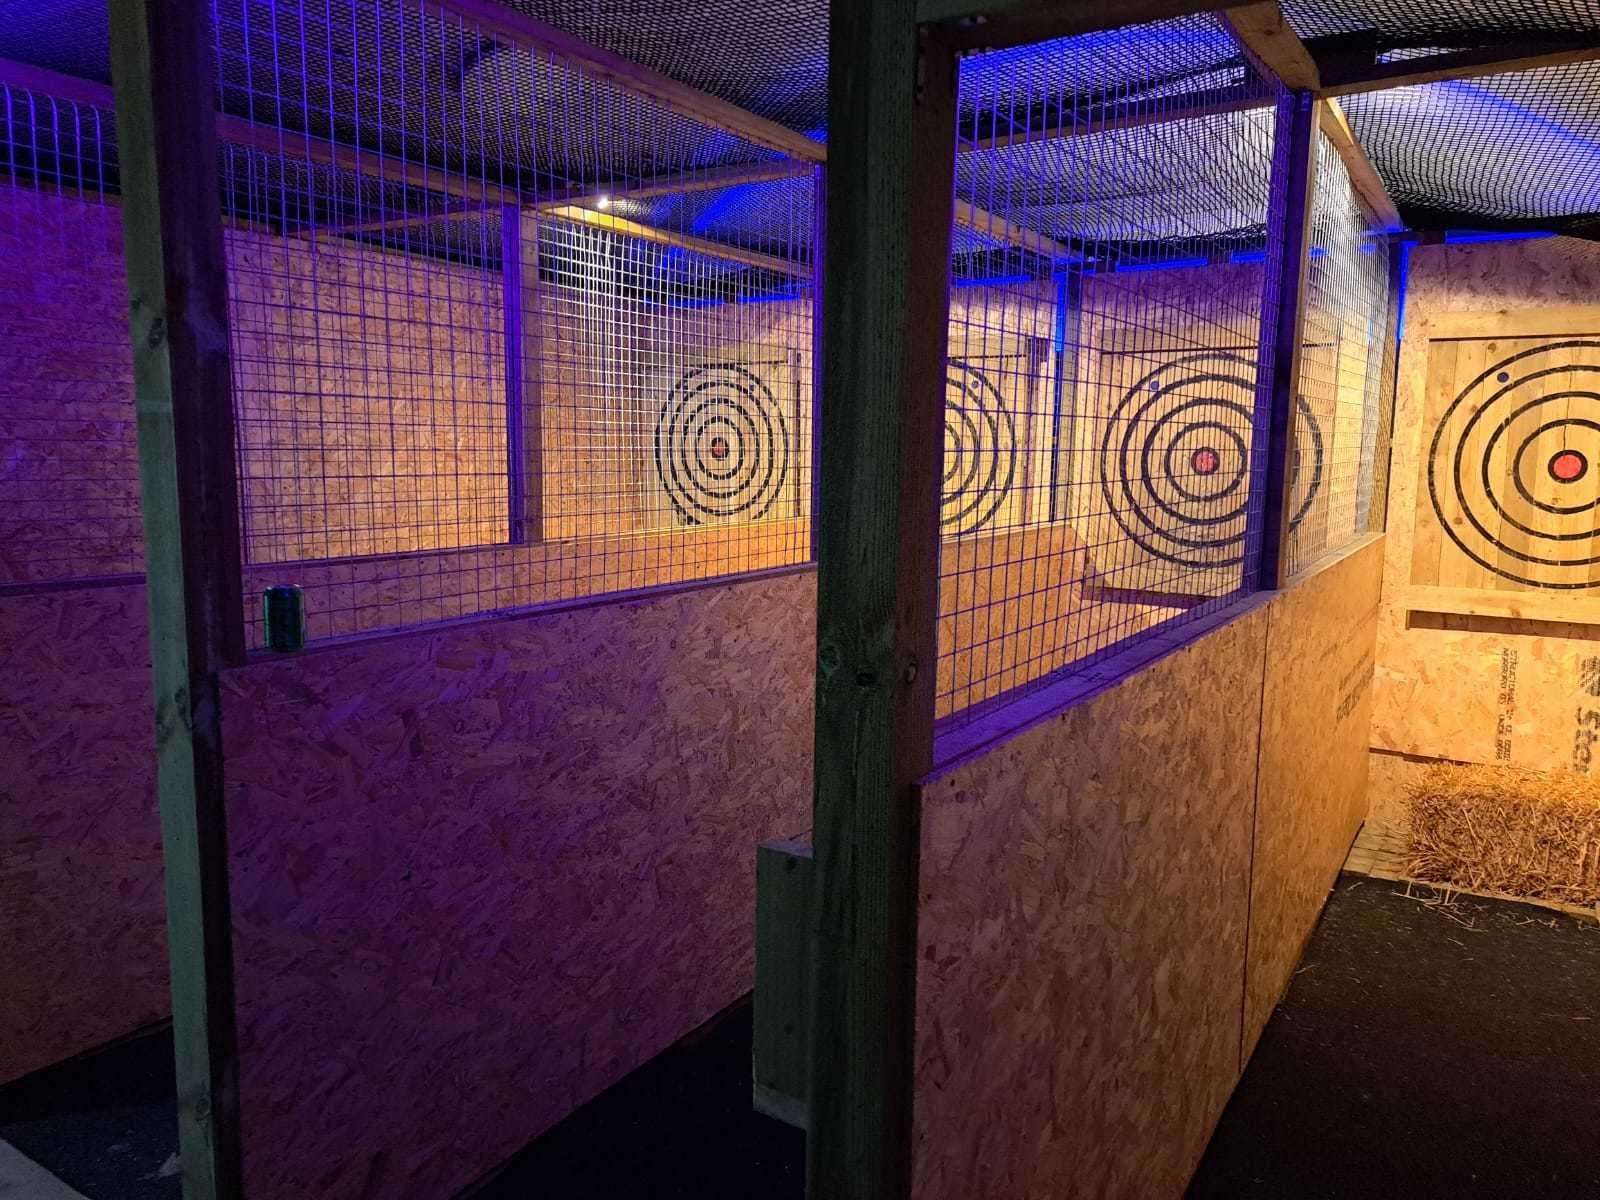 Rainham couple Lewis and Kathy Hickman are opening Medway's first axe throwing centre, TBV Axe Masters, at Fort Luton tomorrow